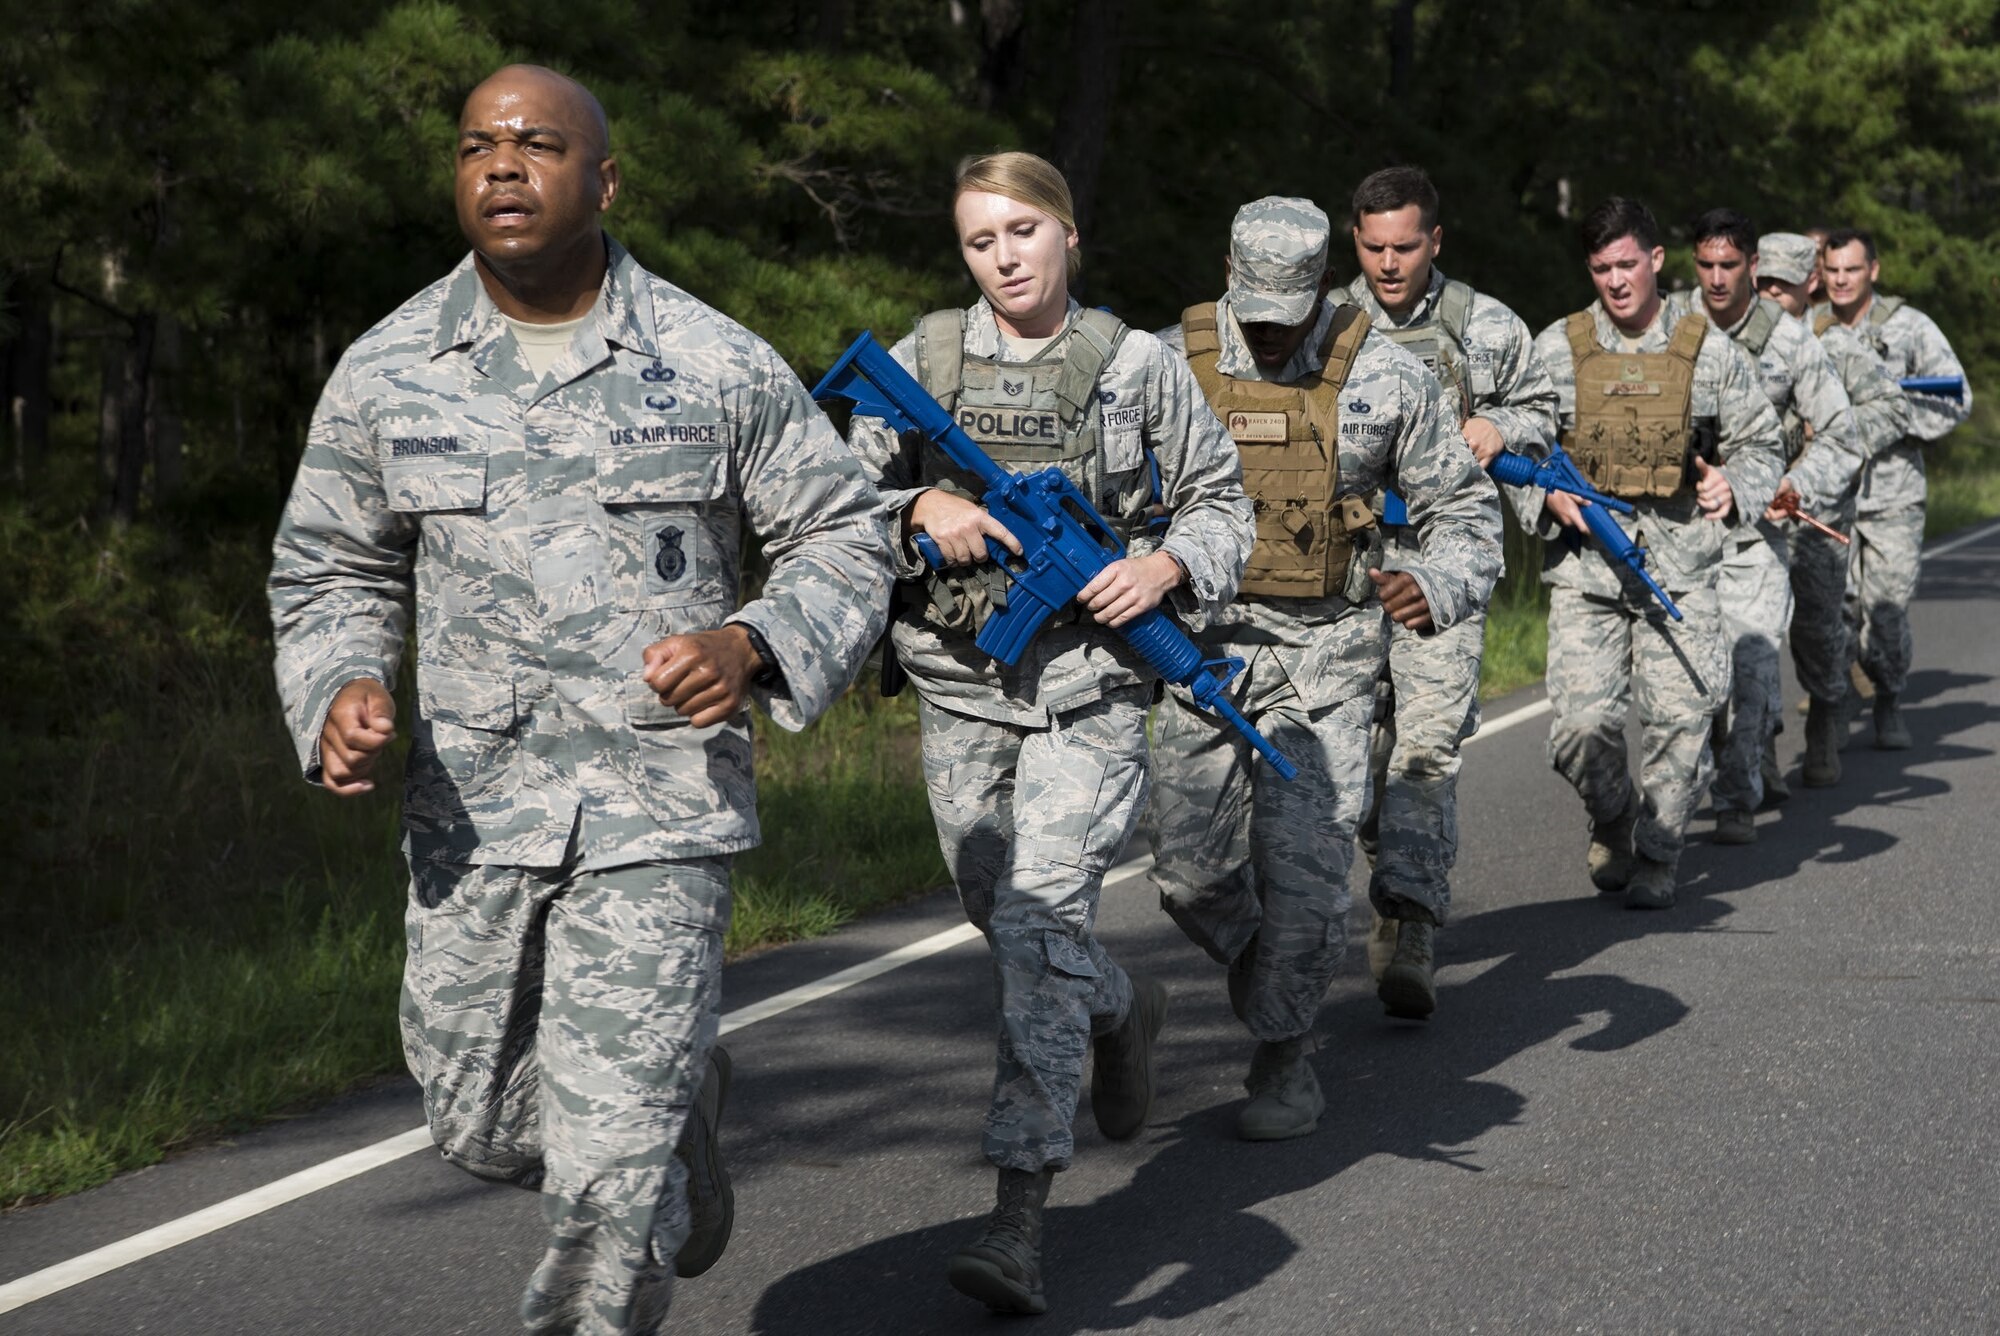 Security forces Airmen with Air Mobility Command train on Joint Base McGuire-Dix-Lakehurst, New Jersey, for the 2018 Air Force Defender Challenge Sept. 5, 2018. To qualify for the competition, security forces members tried out by completing a 6-mile run carrying 25-35 pounds in under two hours; a stress shoot with an M4 carbine and M9 pistol; a CrossFit Hero workout; a test of their reaction to near and far ambushes; an obstacle course; and field operations fire team movements. (U.S. Air Force photo by Airman Ariel Owings)